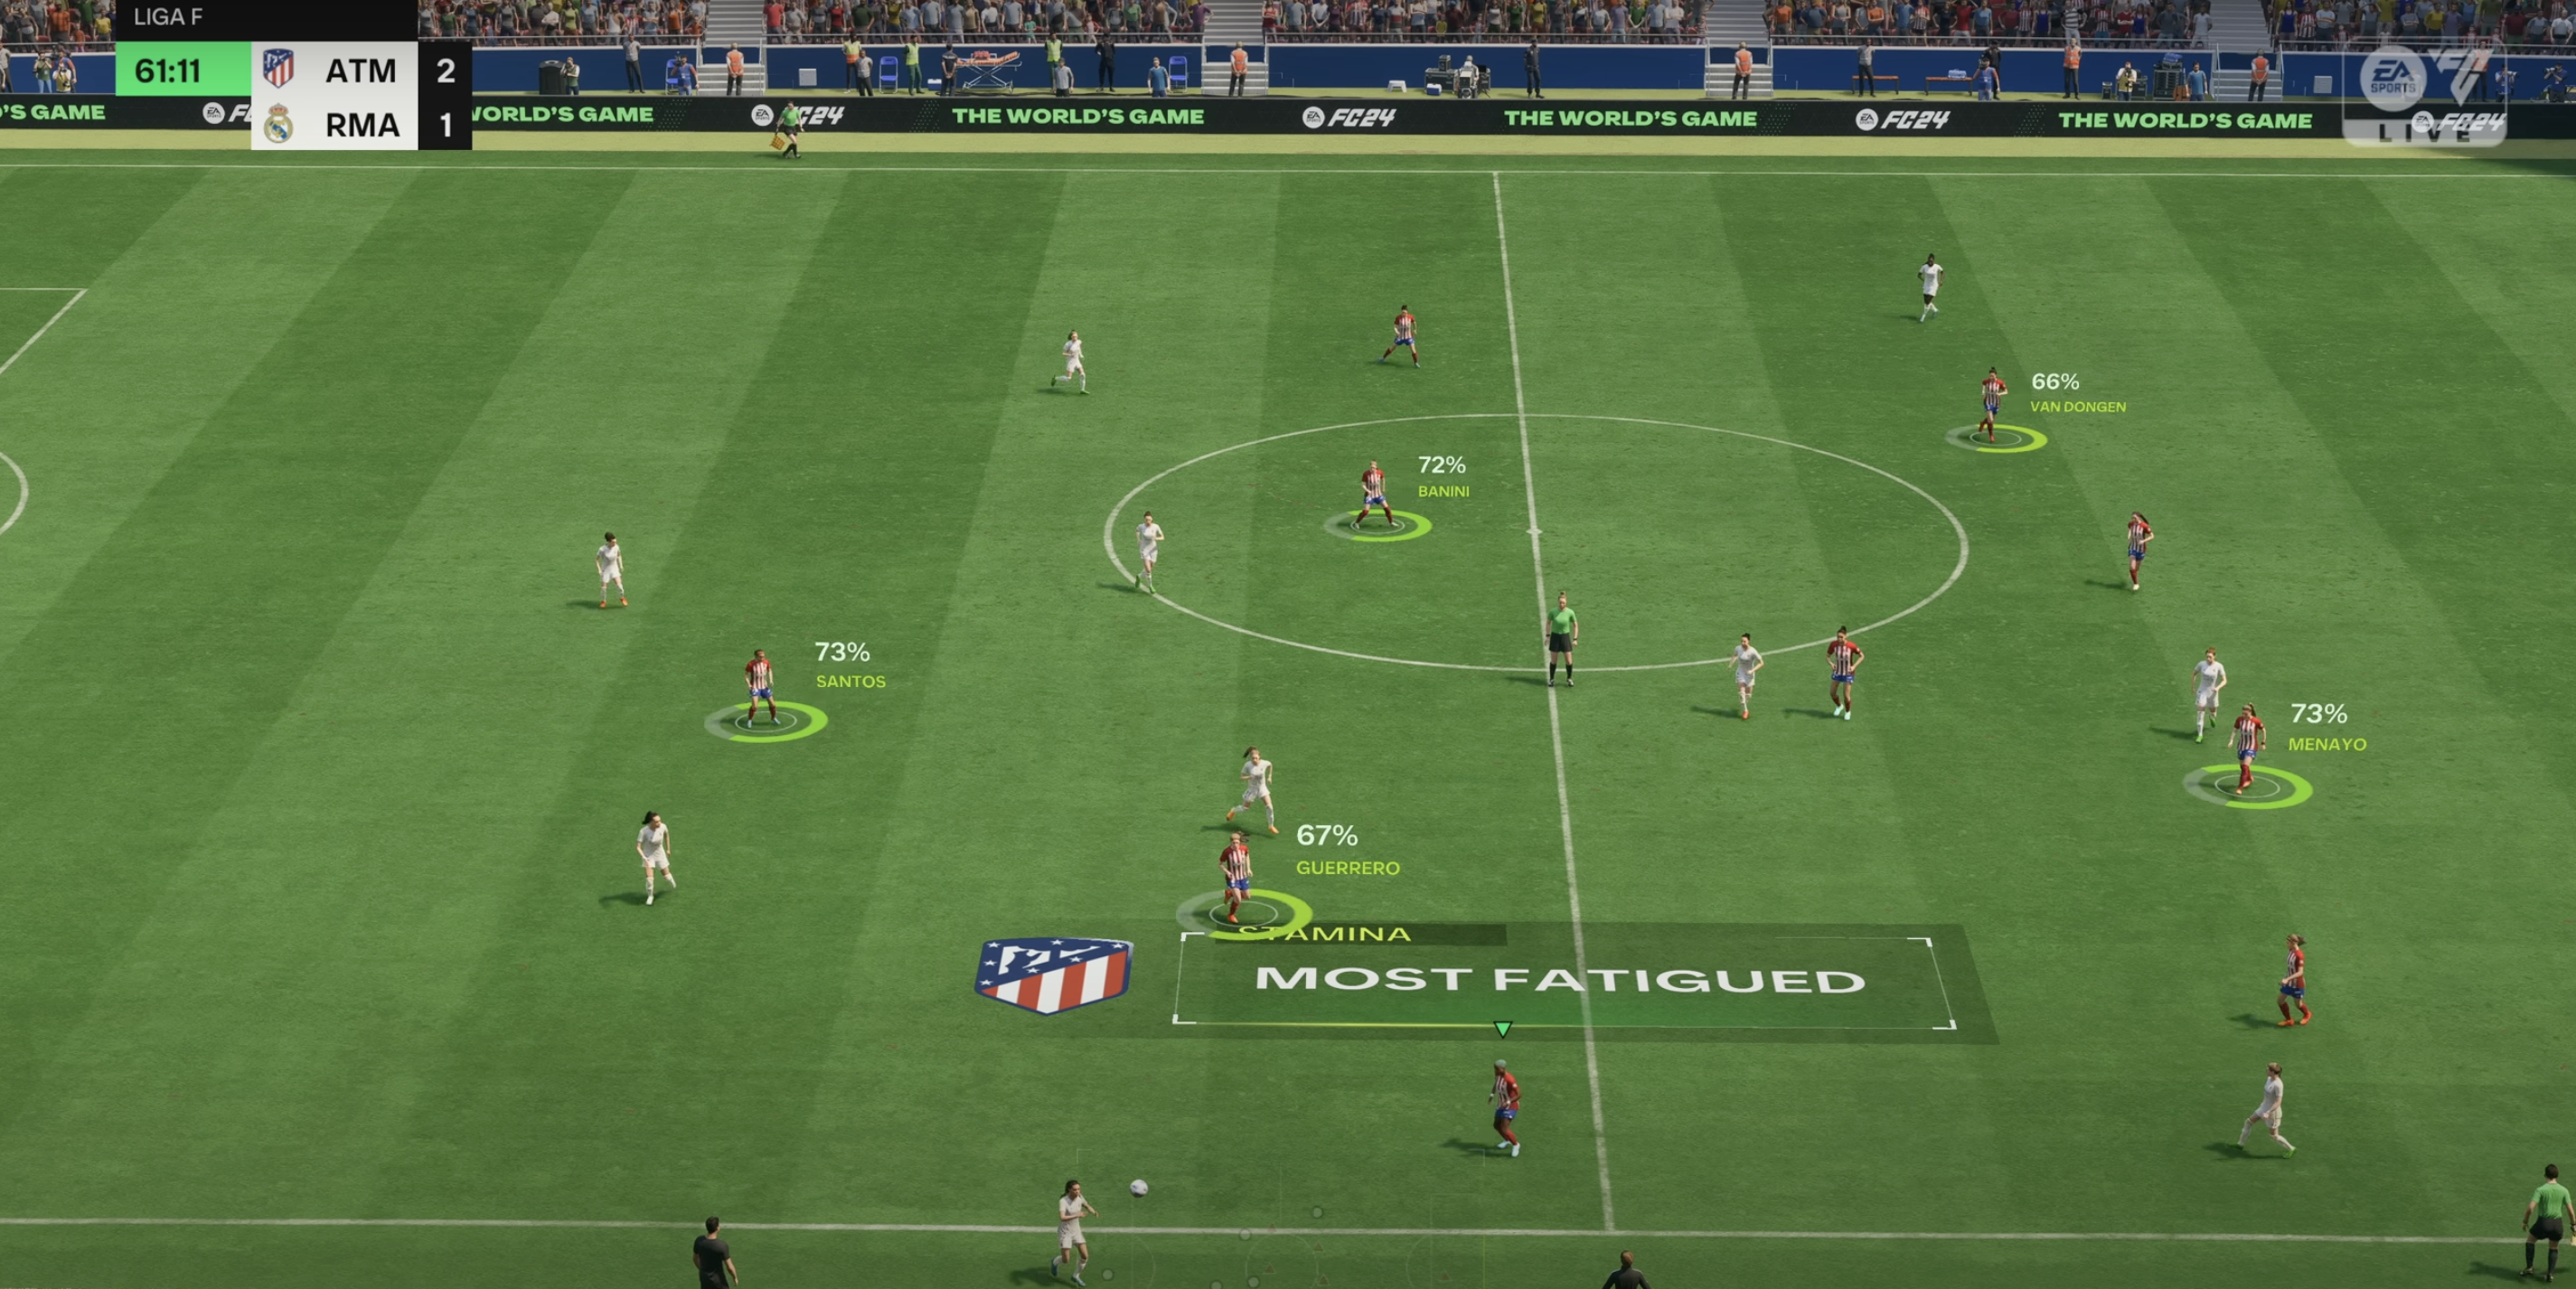 After 30 years, the video game FIFA becomes EA Sports FC